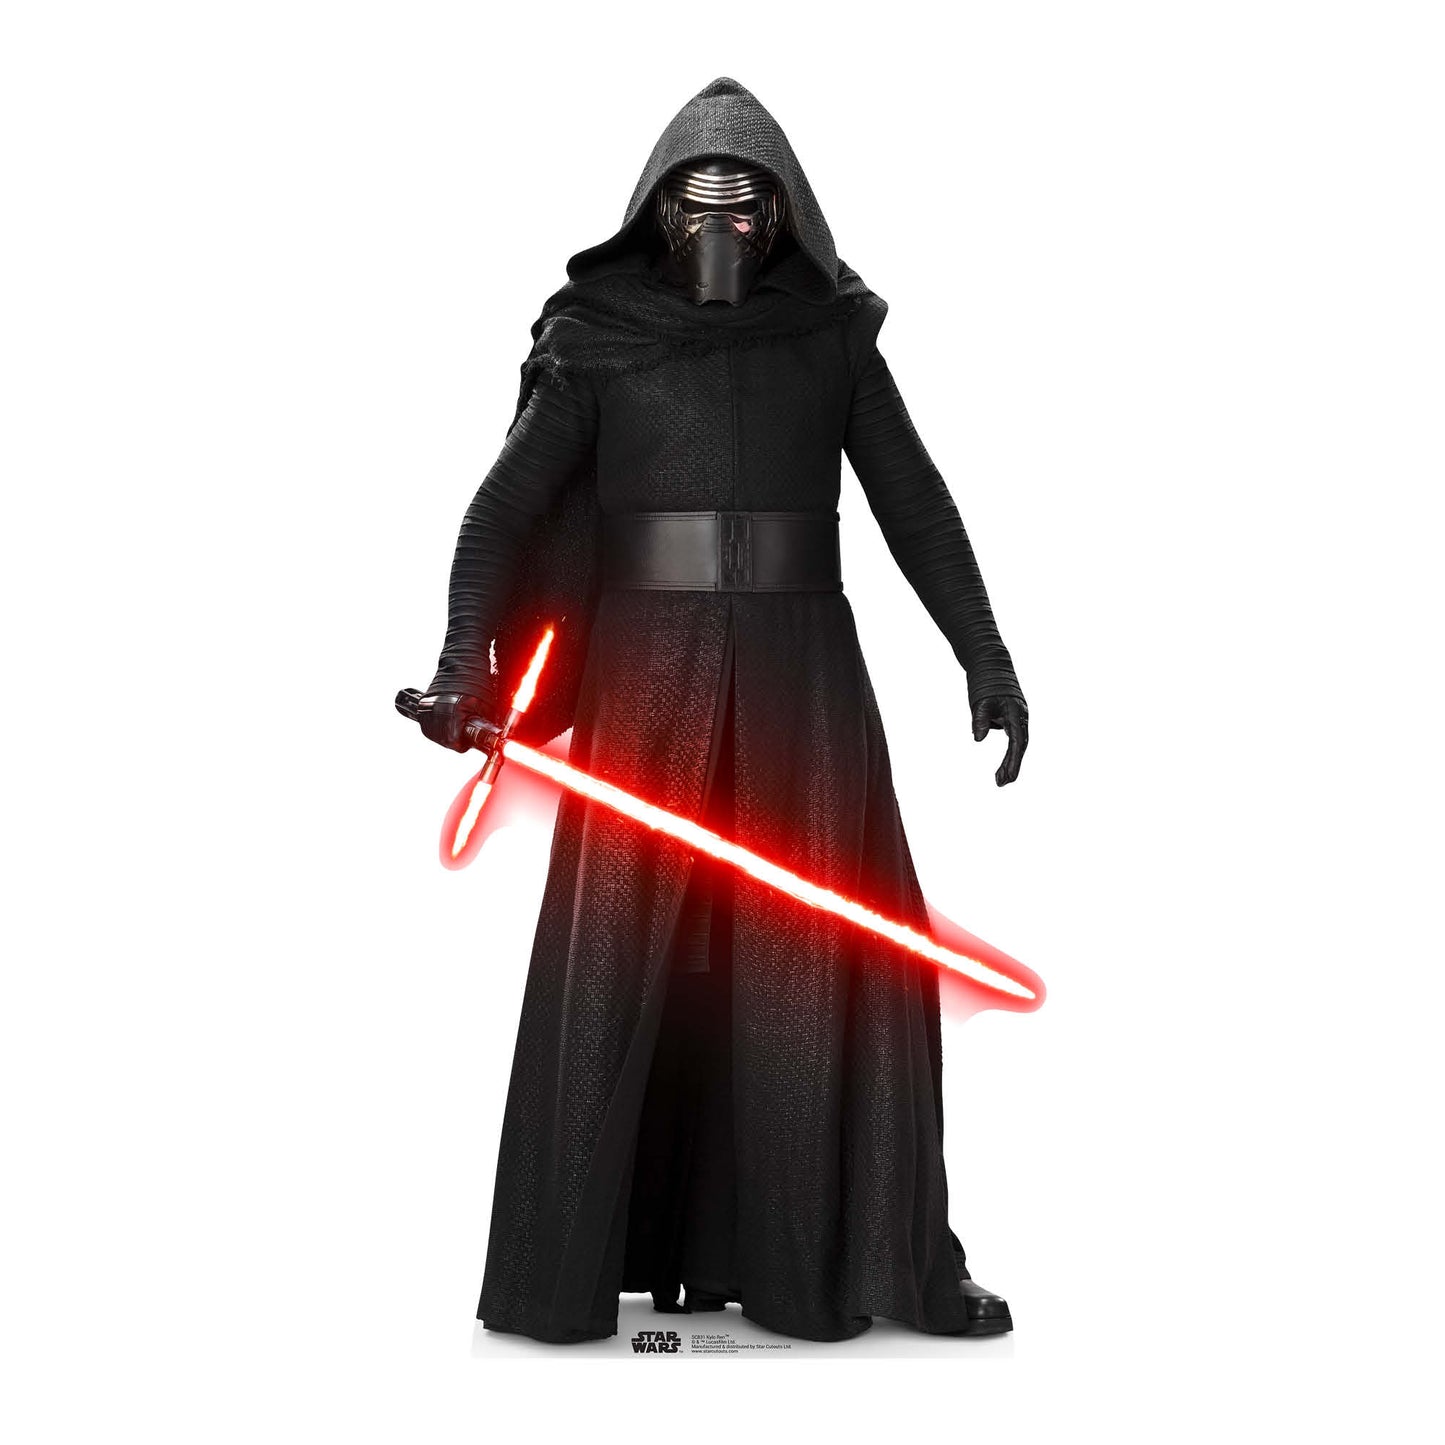 Kylo Ren Star Wars The Force Awakens Cardboard Cut Out Height 184cm